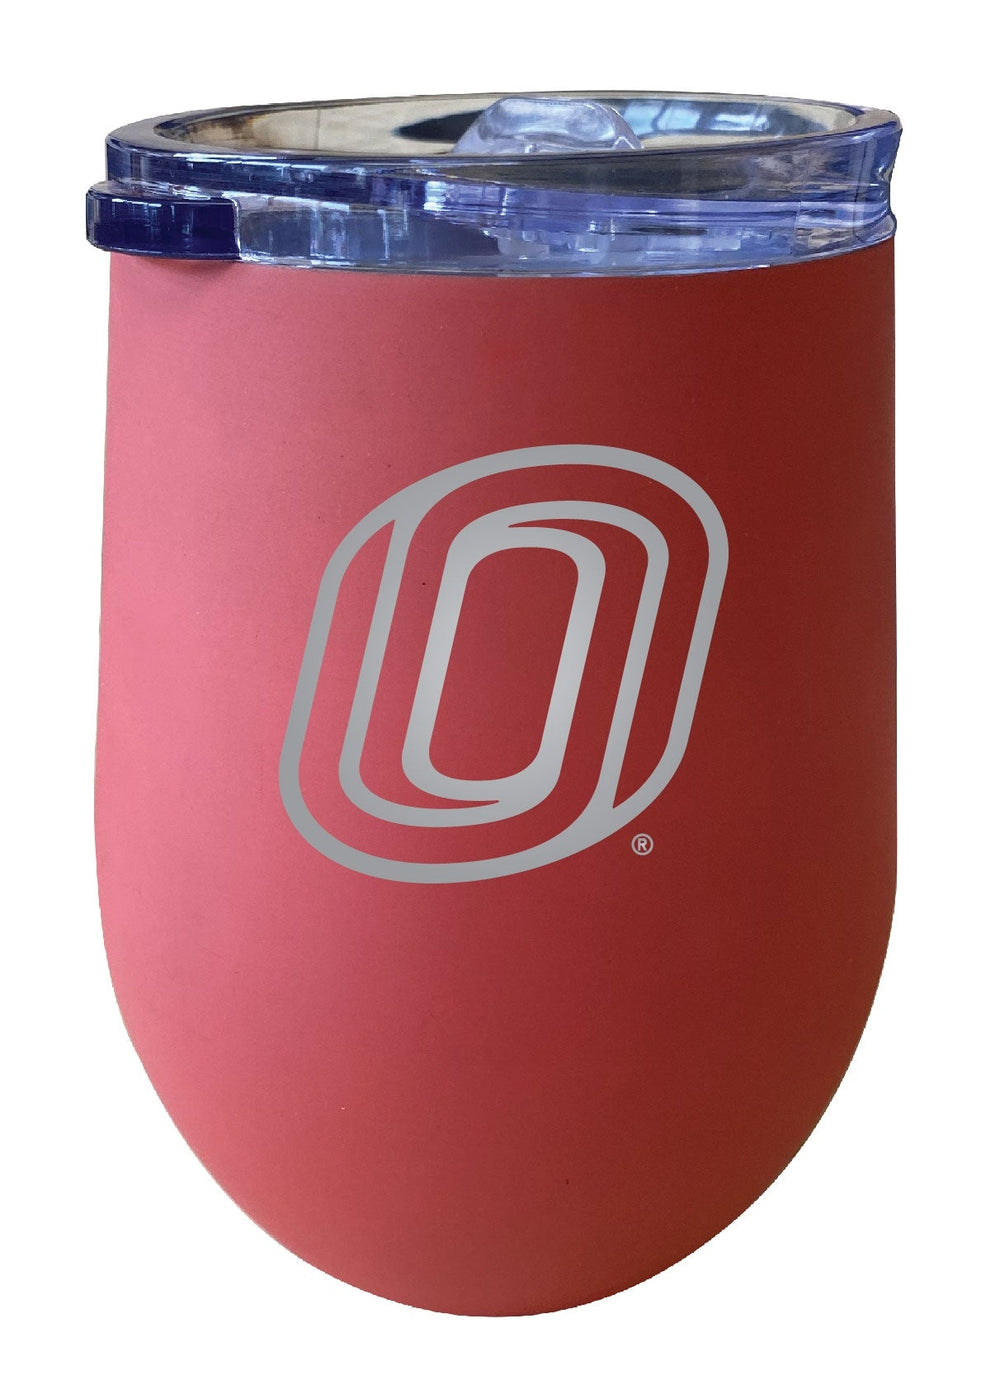 Nebraska at Omaha 12 oz Engraved Insulated Wine Stainless Steel Tumbler Officially Licensed Collegiate Product Image 2